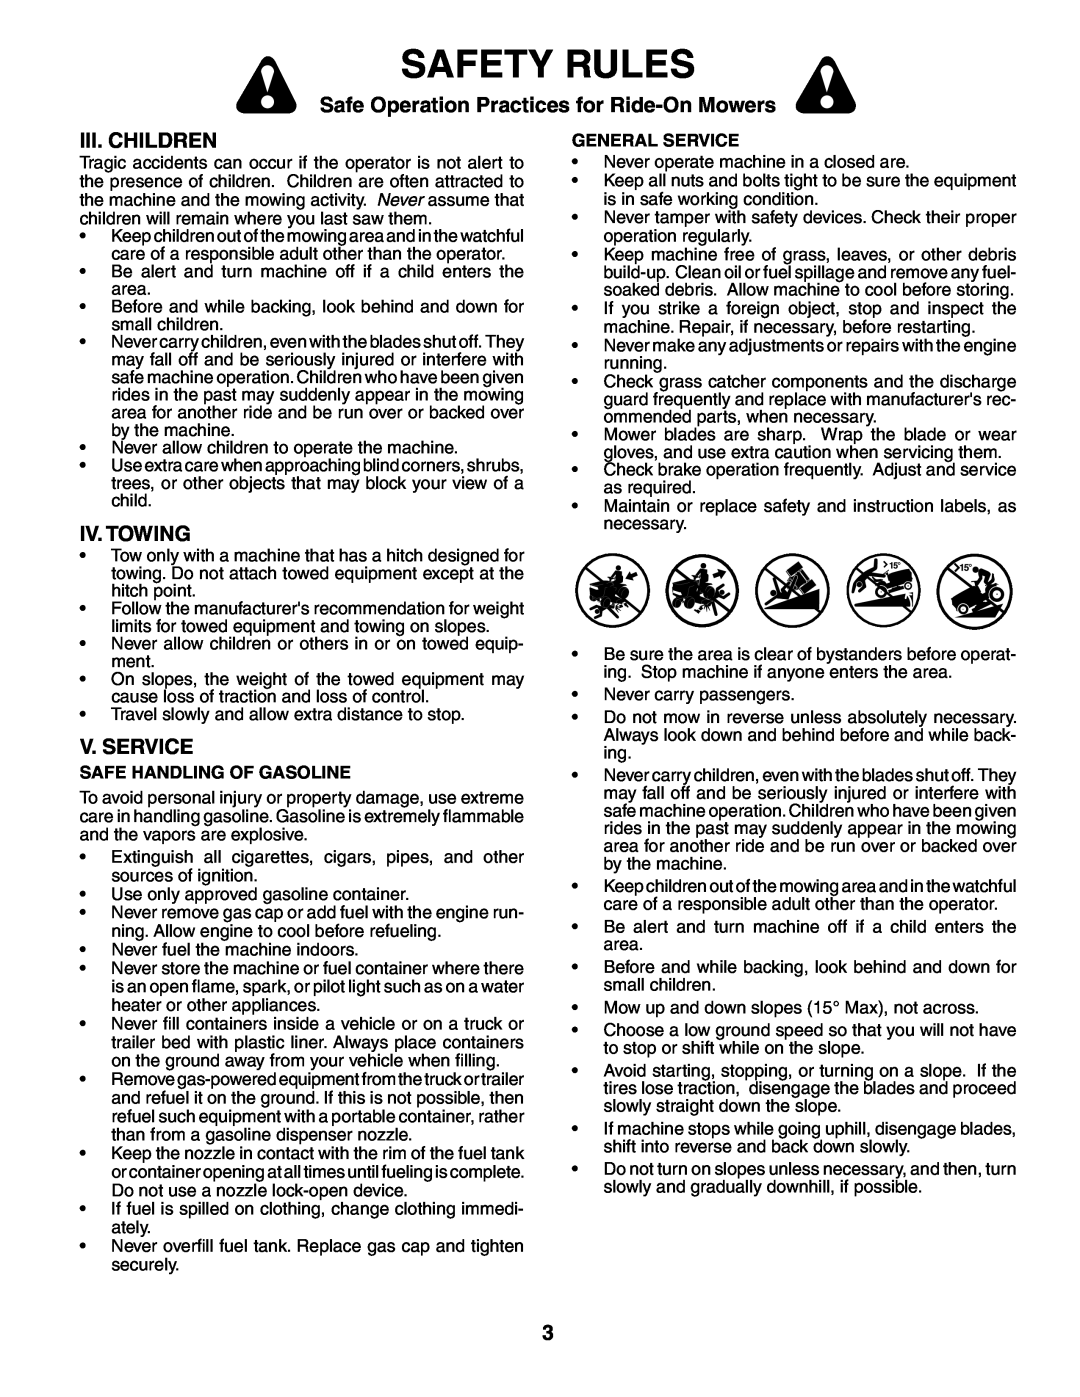 Poulan PD15538LT manual Iii. Children, Iv. Towing, V. Service, Safety Rules, Safe Operation Practices for Ride-On Mowers 